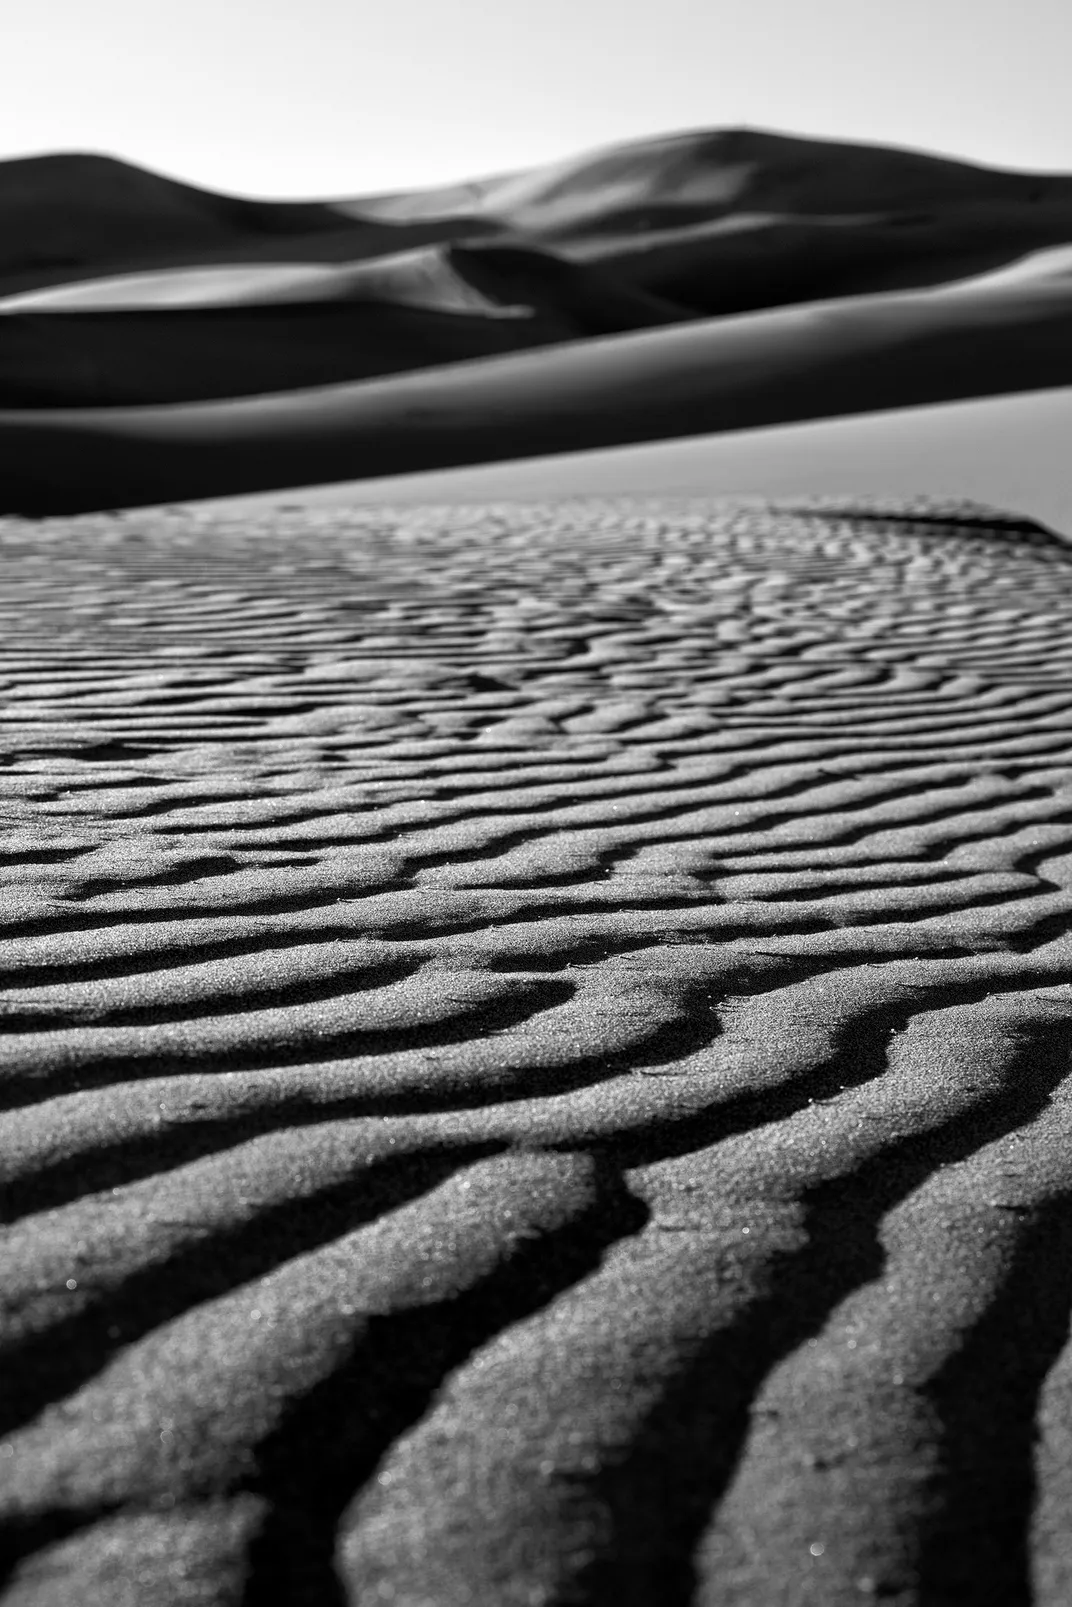 Curvaceous mounds mark the terrain at Great Sand Dunes National Park